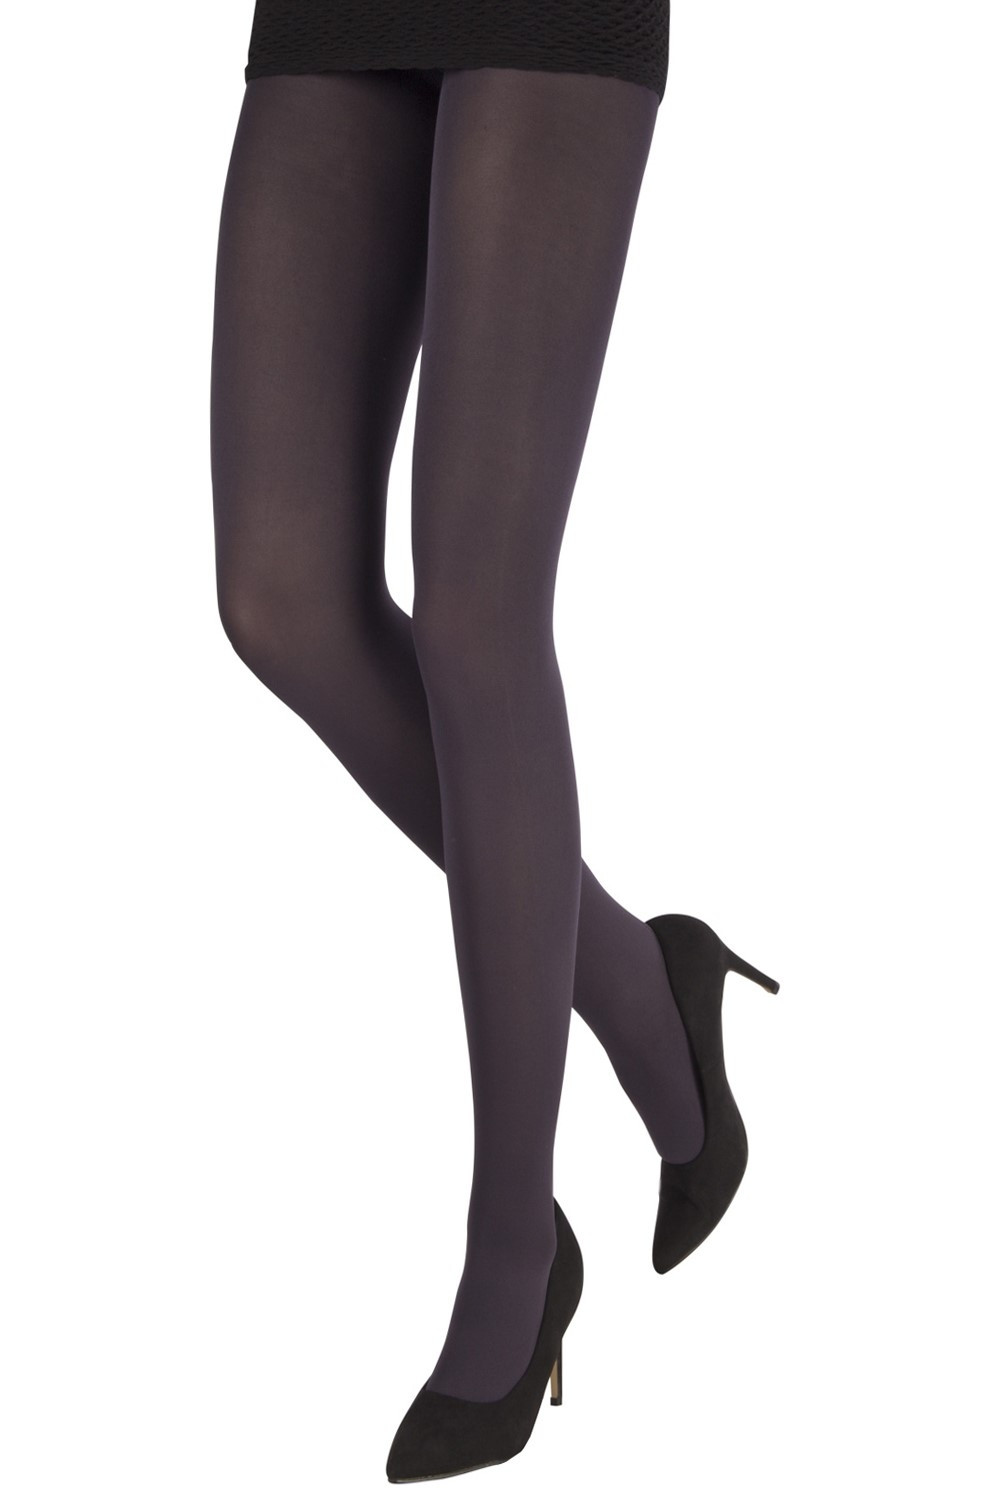 Save 9% Womens Clothing Hosiery Tights and pantyhose Emilio Cavallini Synthetic Micromesh Tight in Black 